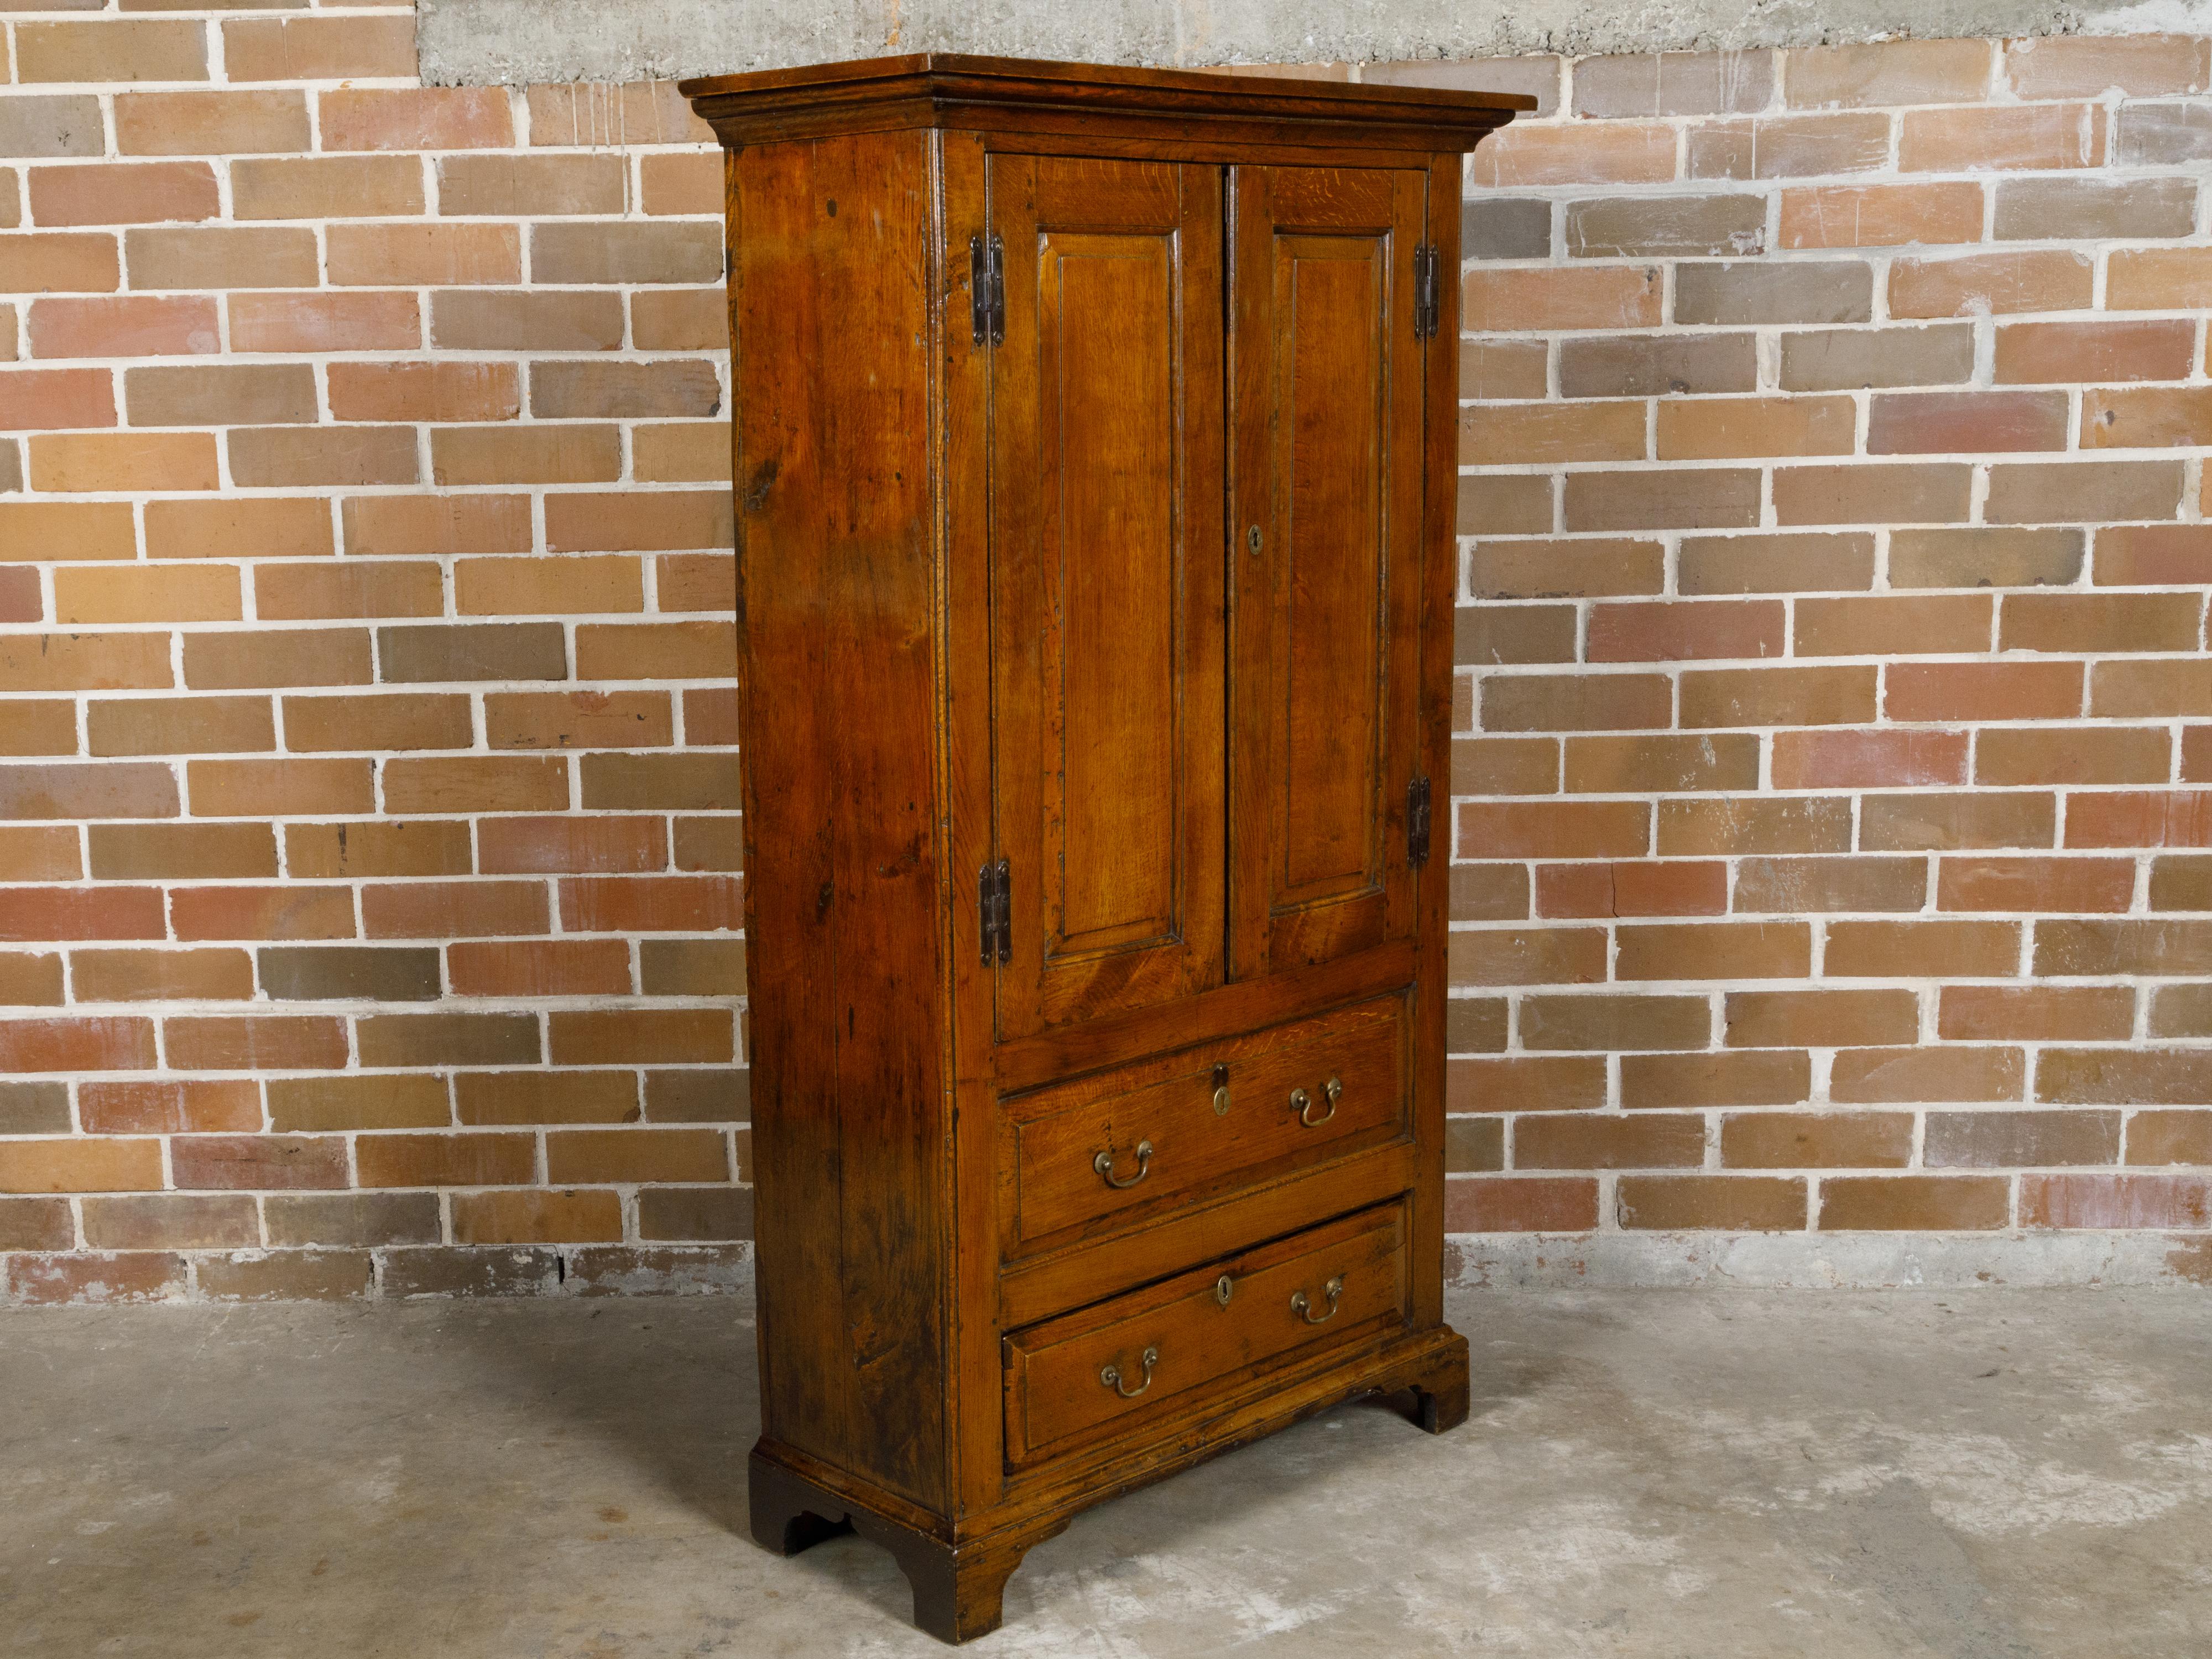 19th Century English Oak Armoire with Carved Doors, Bracket Feet, Brass Hardware For Sale 7